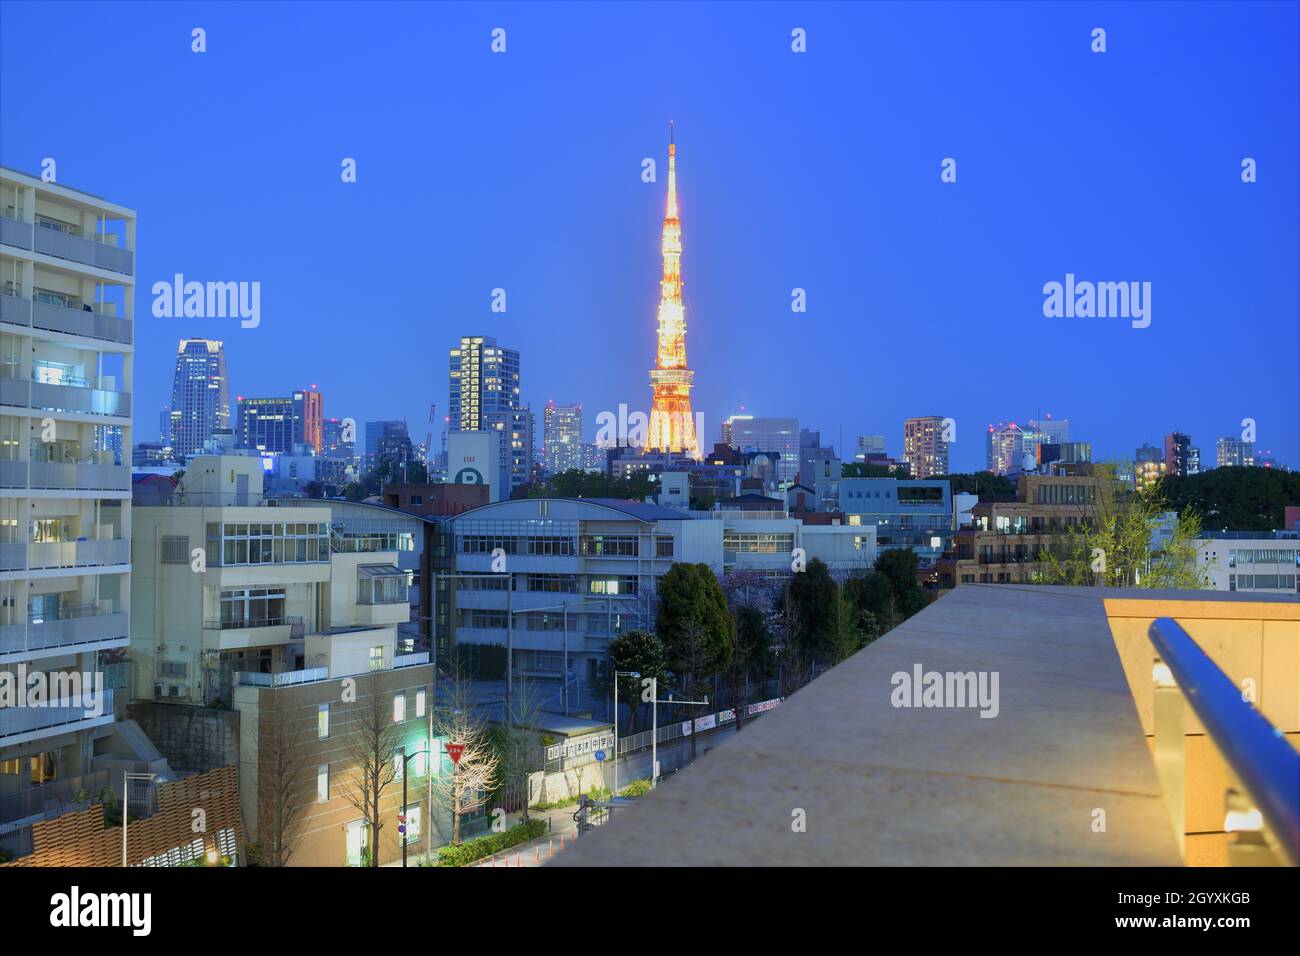 The famous Tokyo Tower illuminated at night scenery with buildings in Minato Japan city view Stock Photo